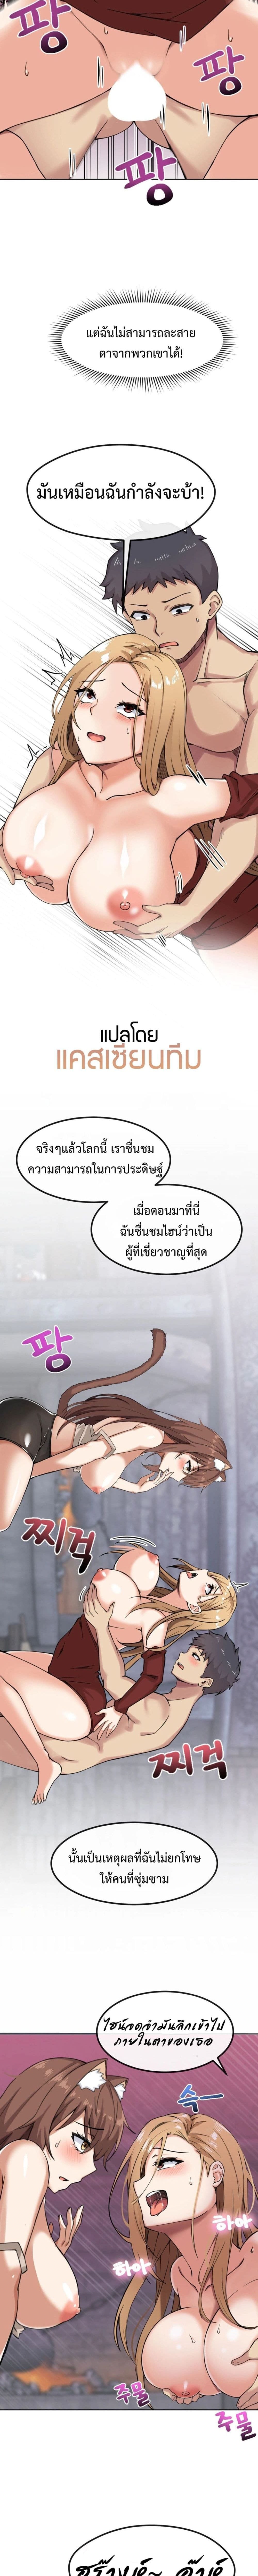 Meat Doll Workshop in Another World ตอนที่ 2 ภาพ 16